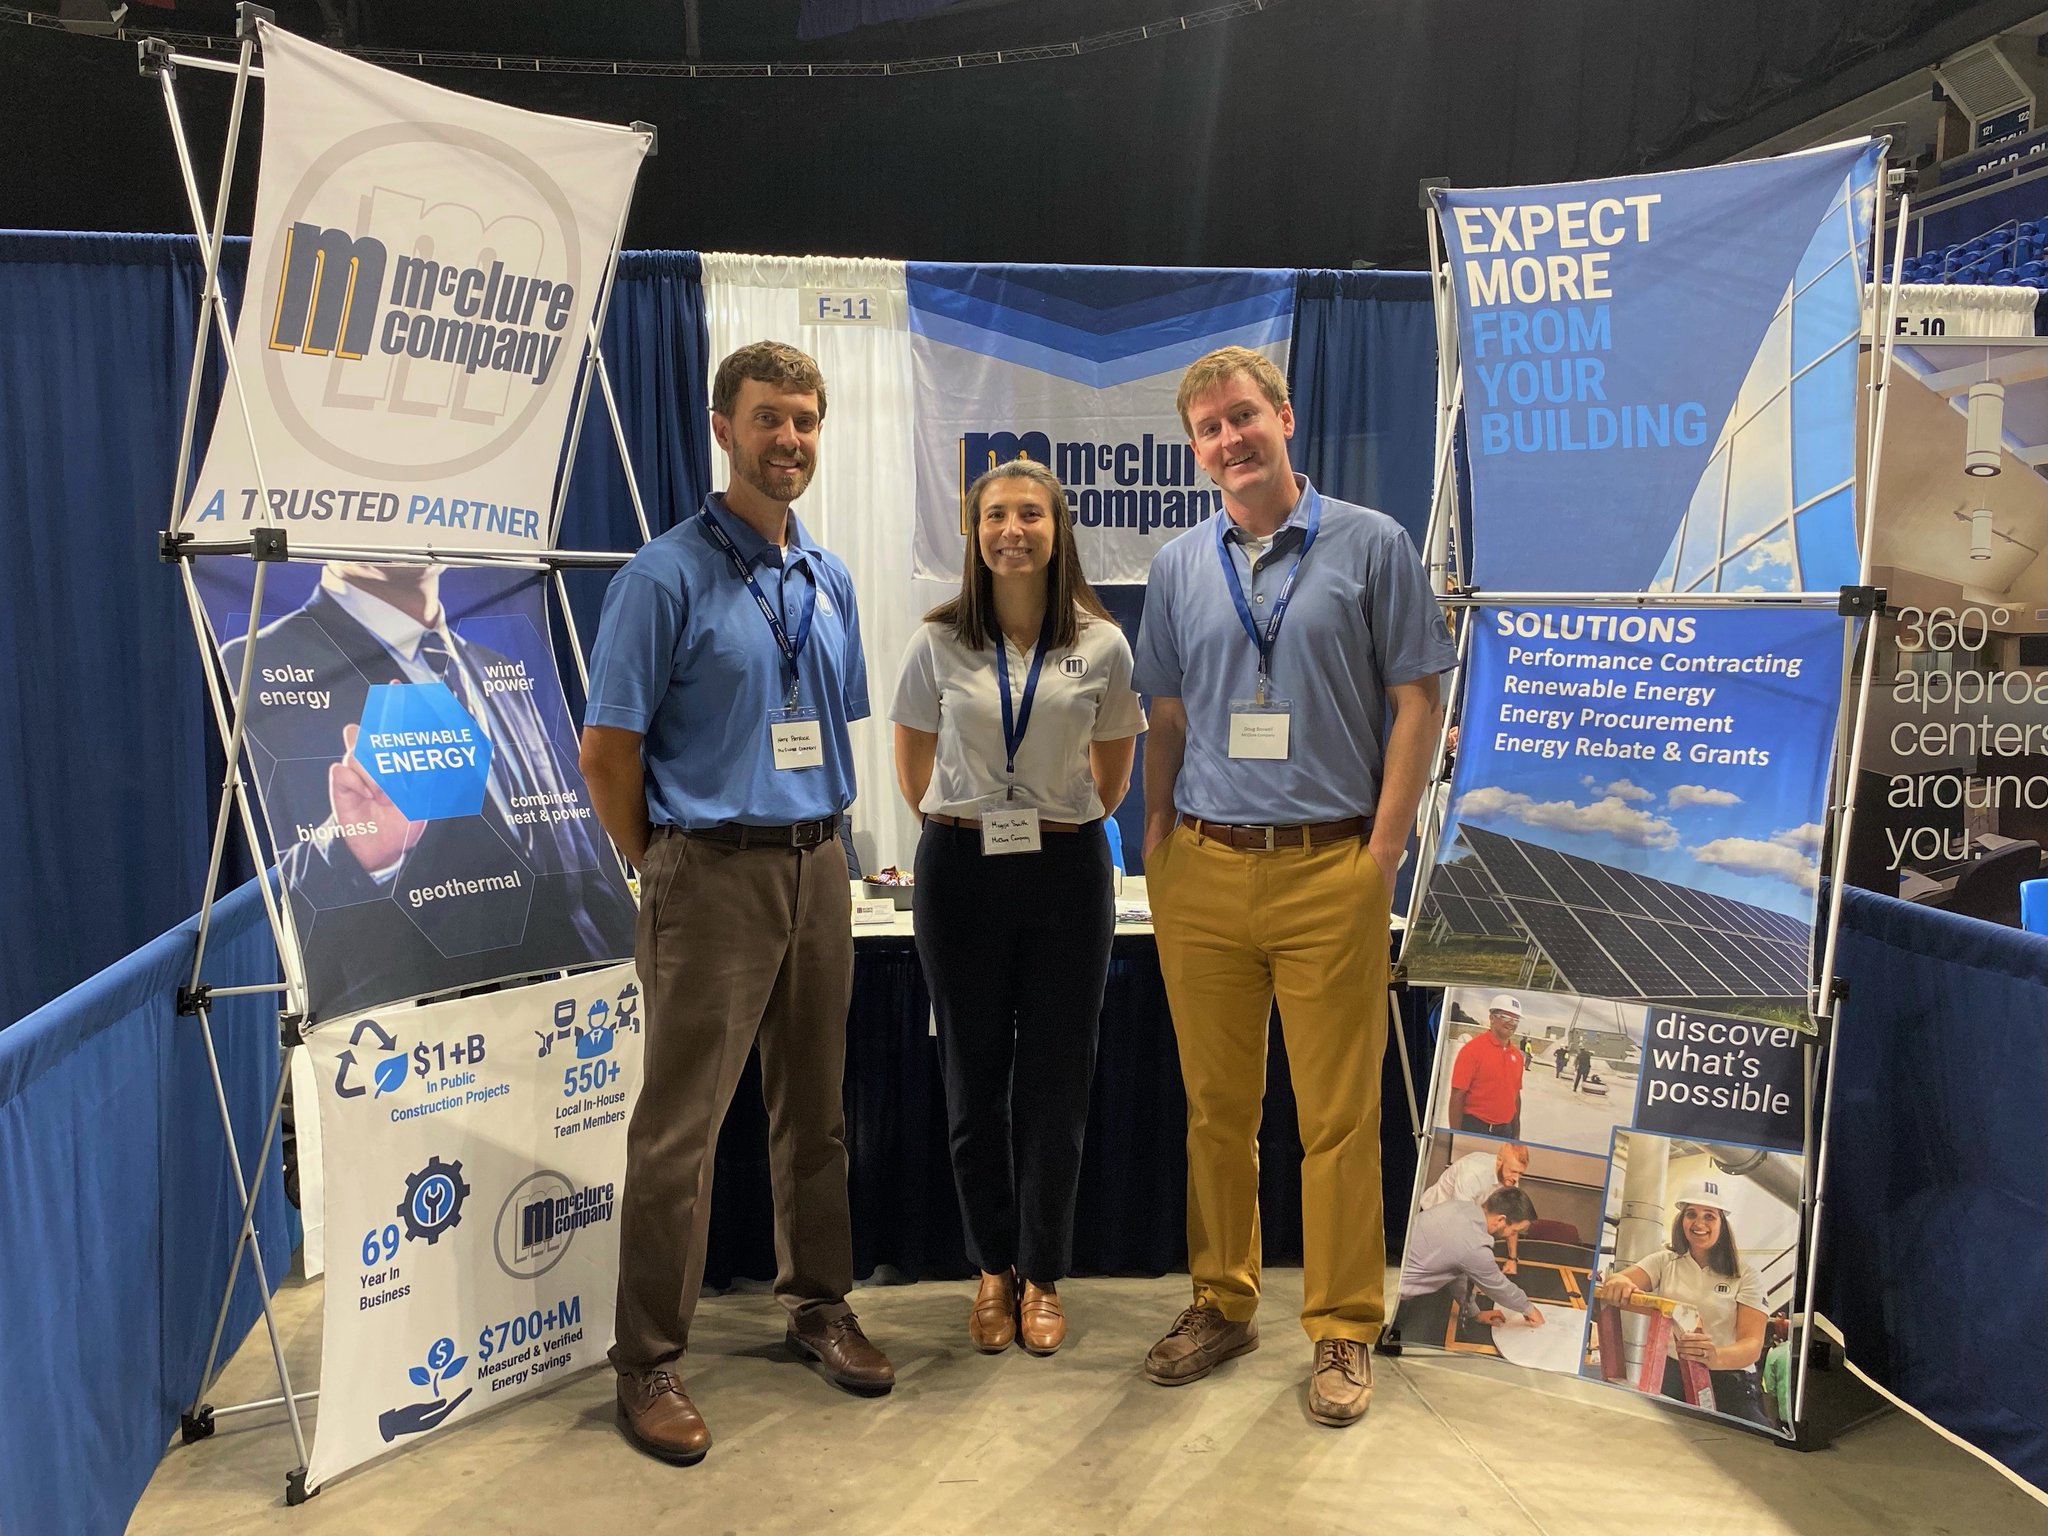 McClure Company on Twitter "We're out and about at the PSU_AE 2022